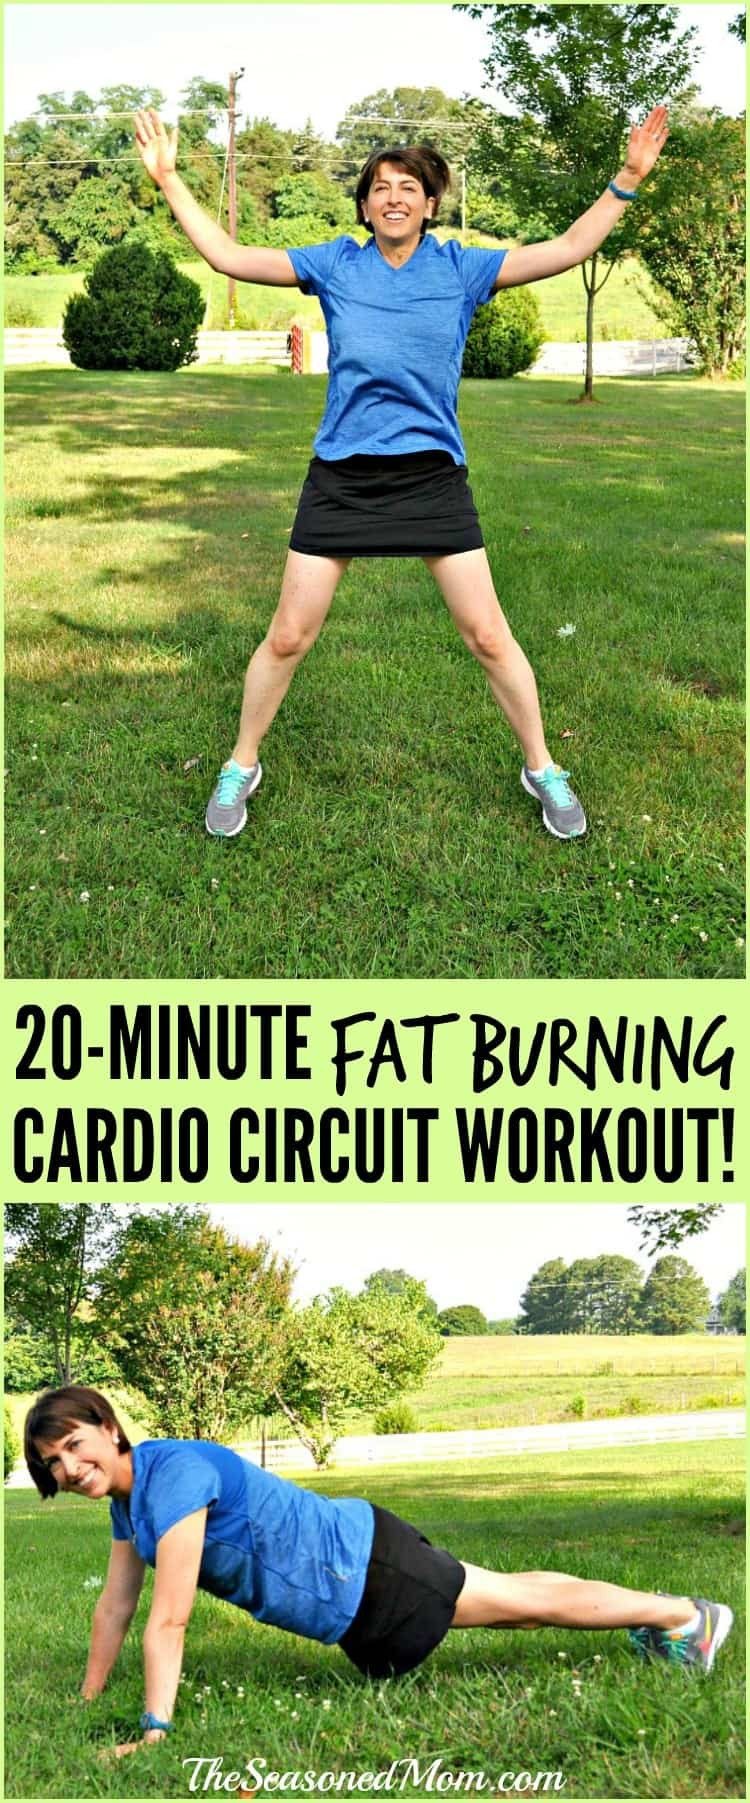 Cardio Fat Burning Workout
 20 Minute Living Room Workout The Seasoned Mom